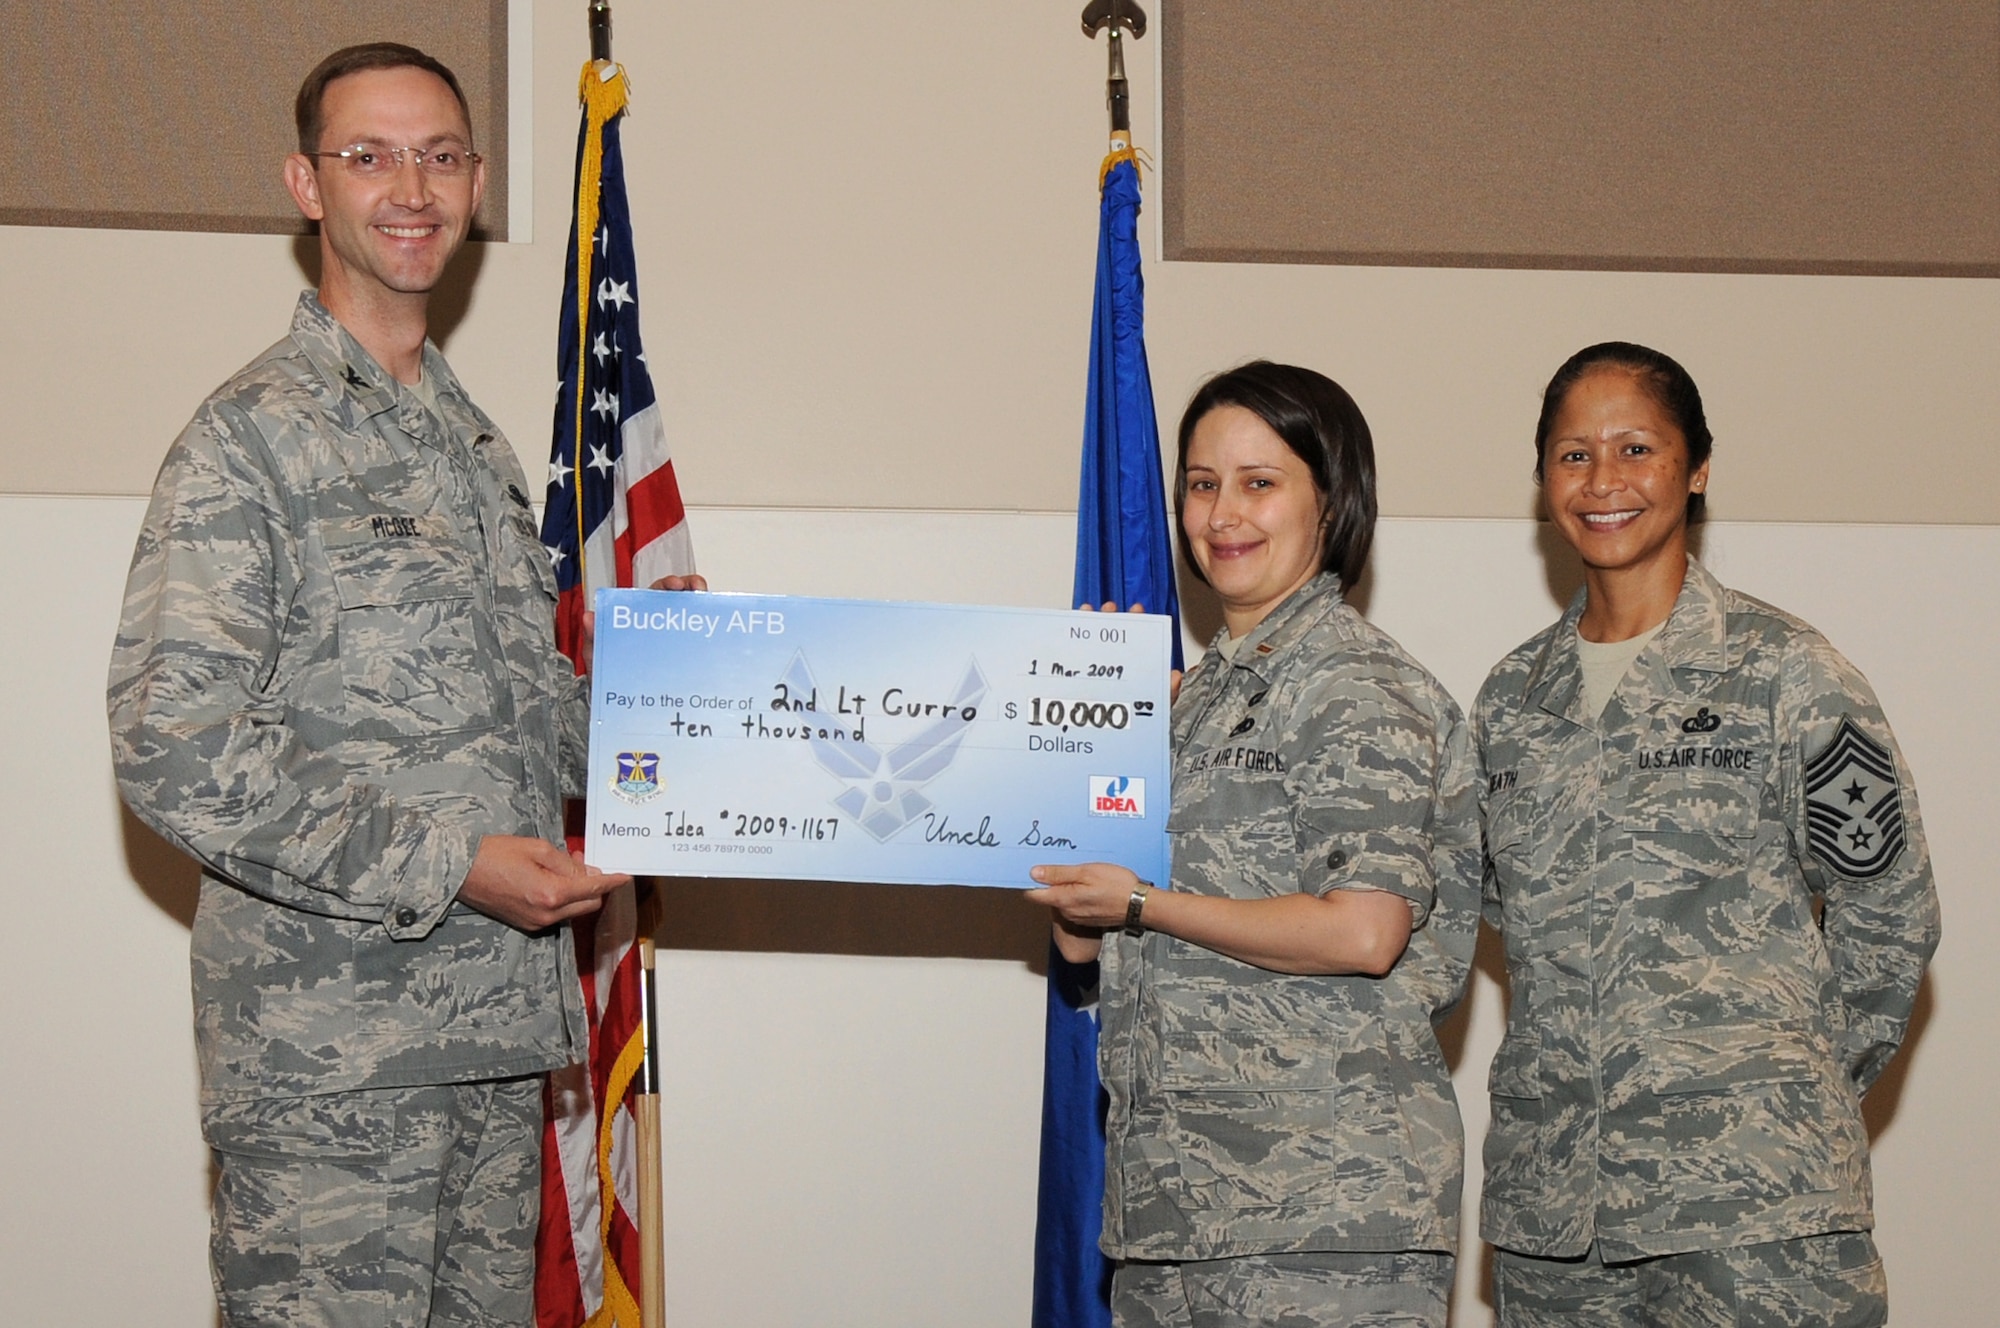 BUCKLEY AIR FORCE BASE, Colo. – 2nd Lt. Shawn Curro was awarded a $10,000 check from the Air Force Innovative Development through Employee Awareness Program during the 460th Space Wing commander’s call here, June 11.  Col. Wayne McGee, 460th SW commander, and Chief Master Sgt. Arleen Heath, 460th SW Command Chief presented the check on behalf of the IDEA Program.  The program rewards Airmen for ideas that save Air Force money and resources.  (U.S. Air Force photo by Senior Airman John Easterling)